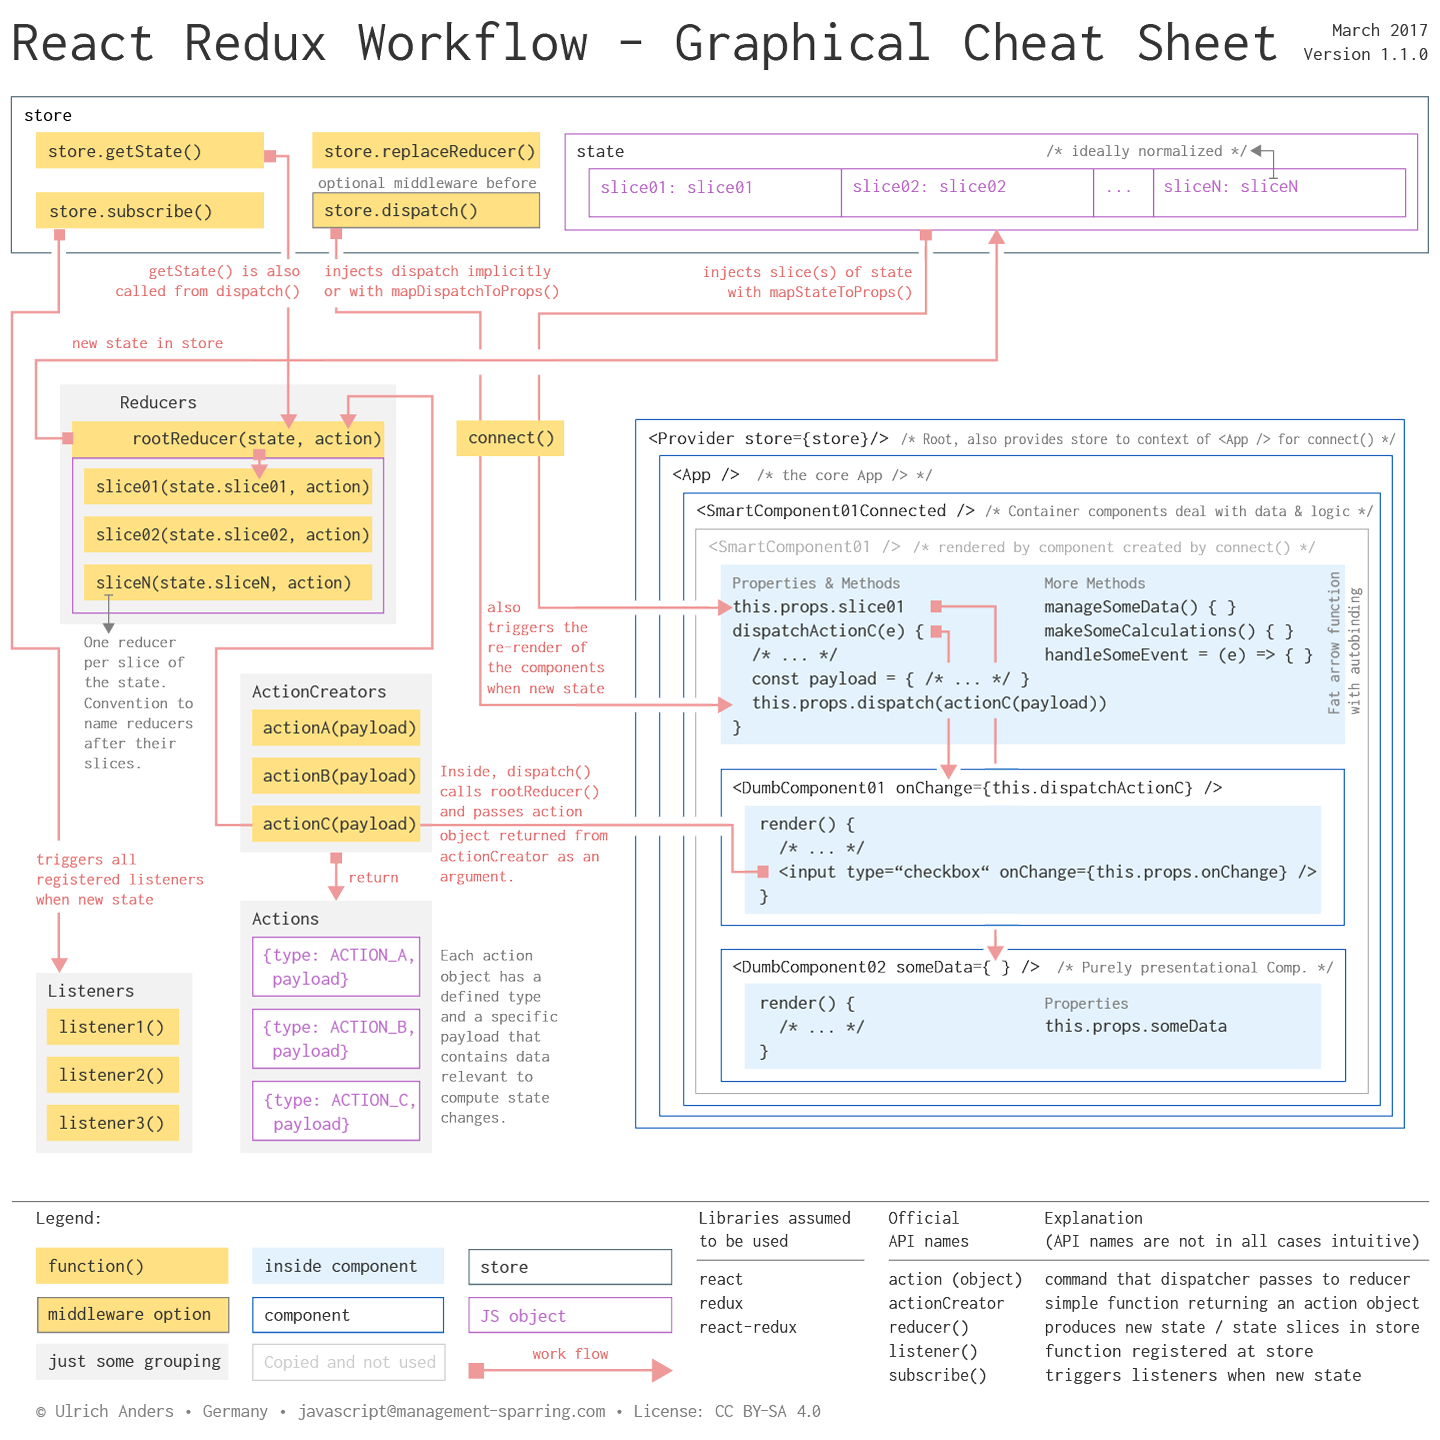 react-redux-workflow-graphical-cheat-sheet_v110.png